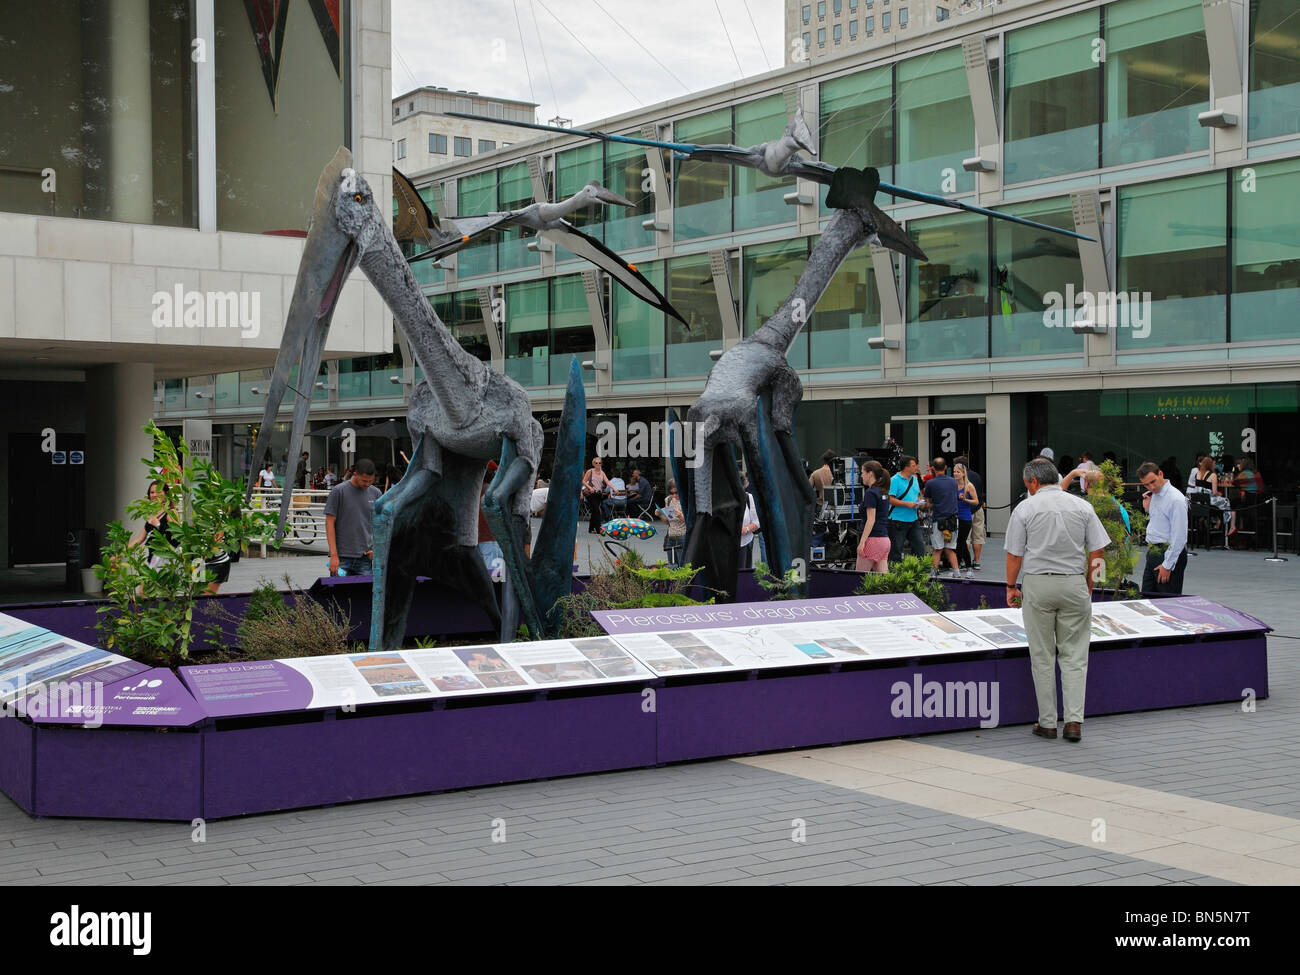 Exhibition of Pterosaurs outside the Royal festival hall, Southbank, London. Stock Photo